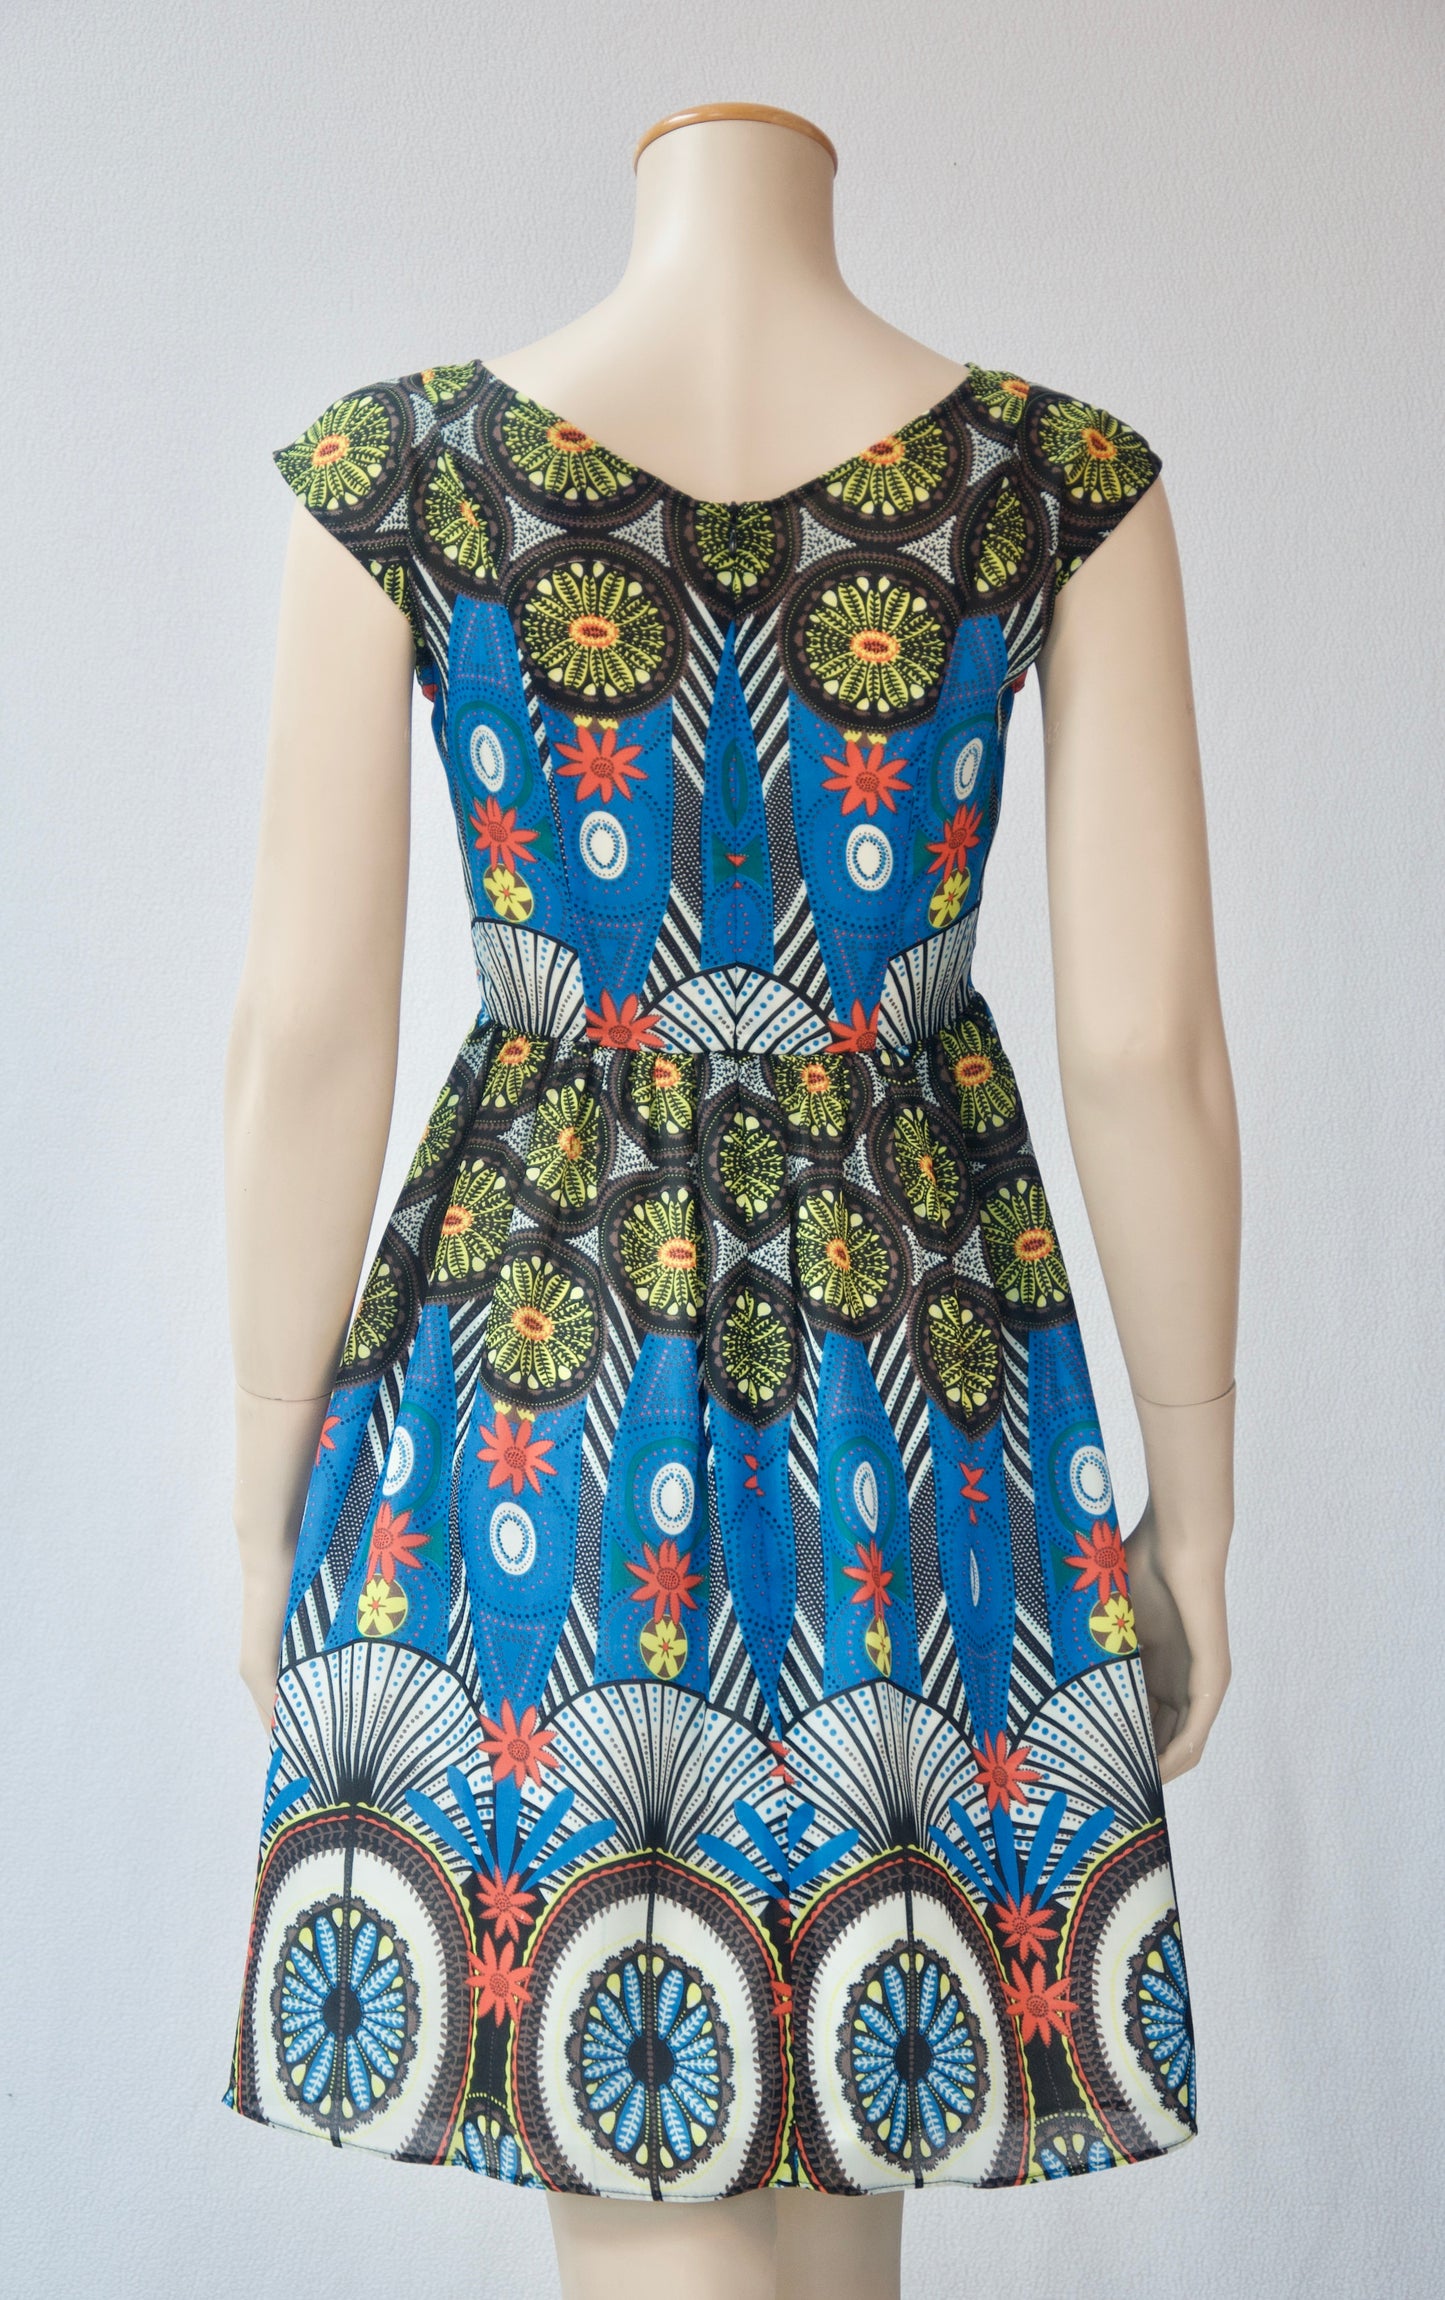 Multi Colored Floral Printed Dress